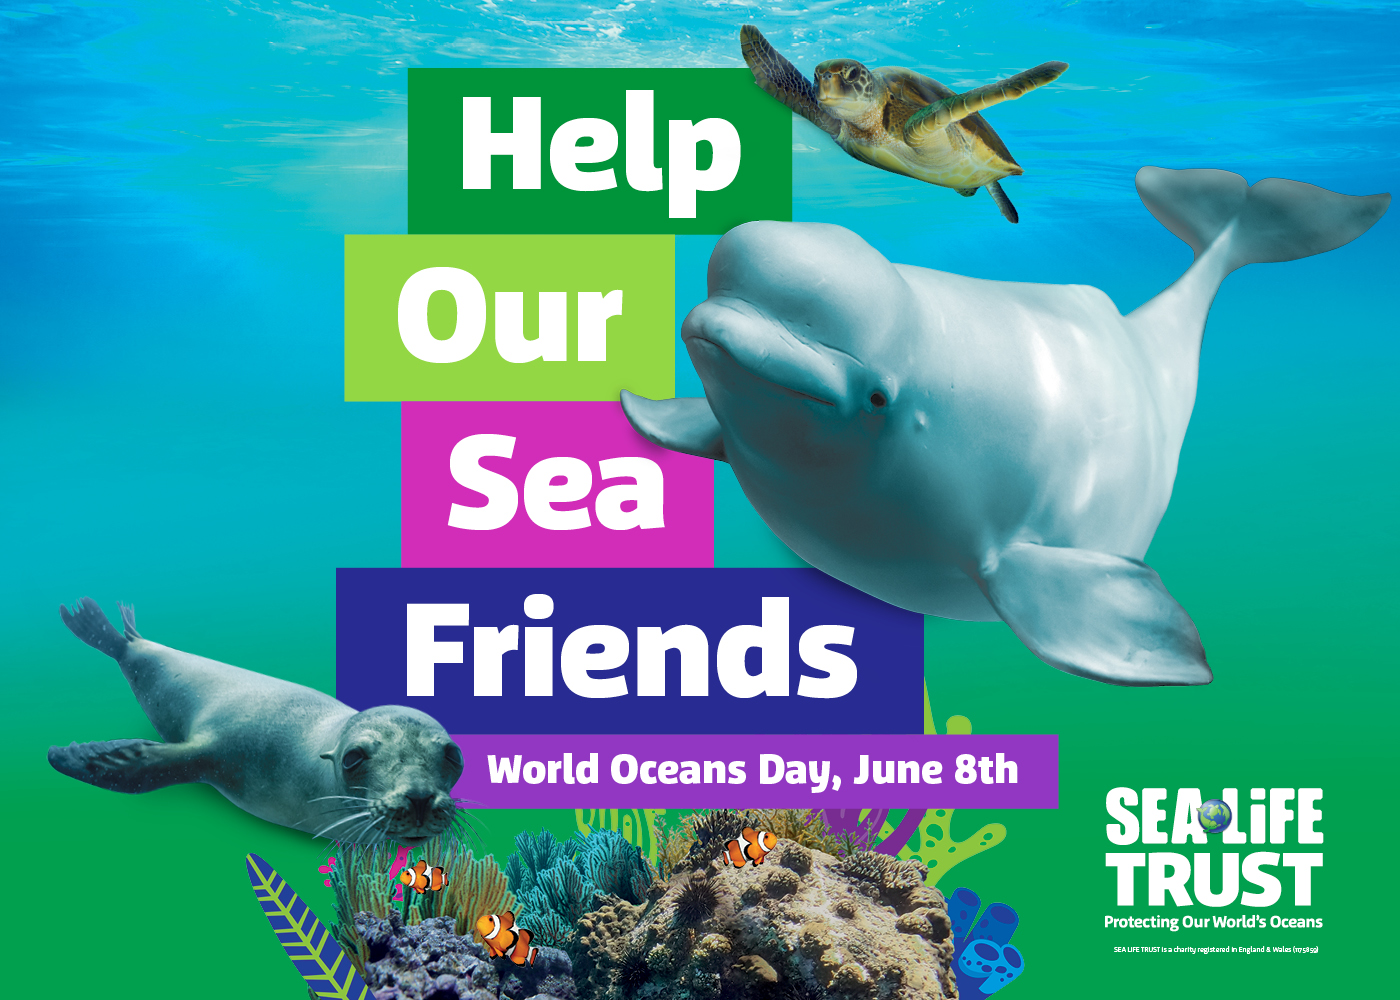 Image featuring a seal, sea turtle, and beluga whale with the messaging 